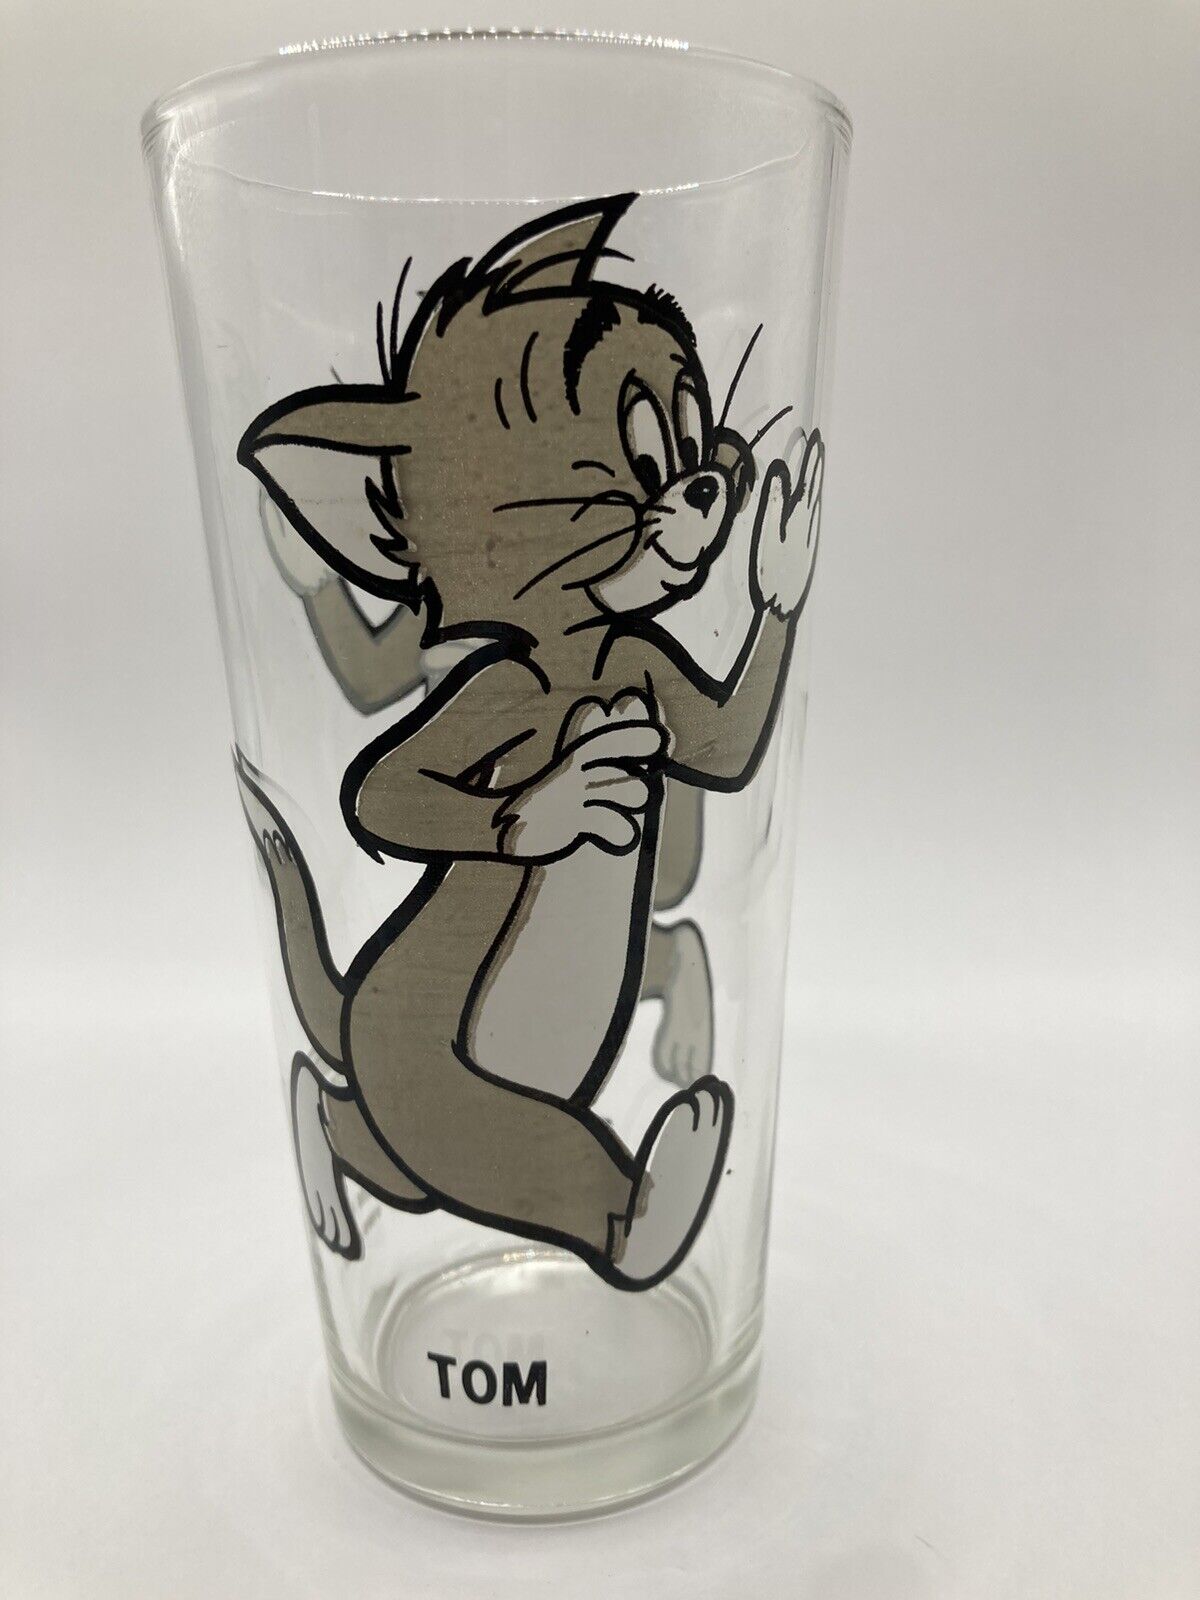 Vintage 1975 Pepsi Collector Series MGM Tom Drinking Glasses 6.25